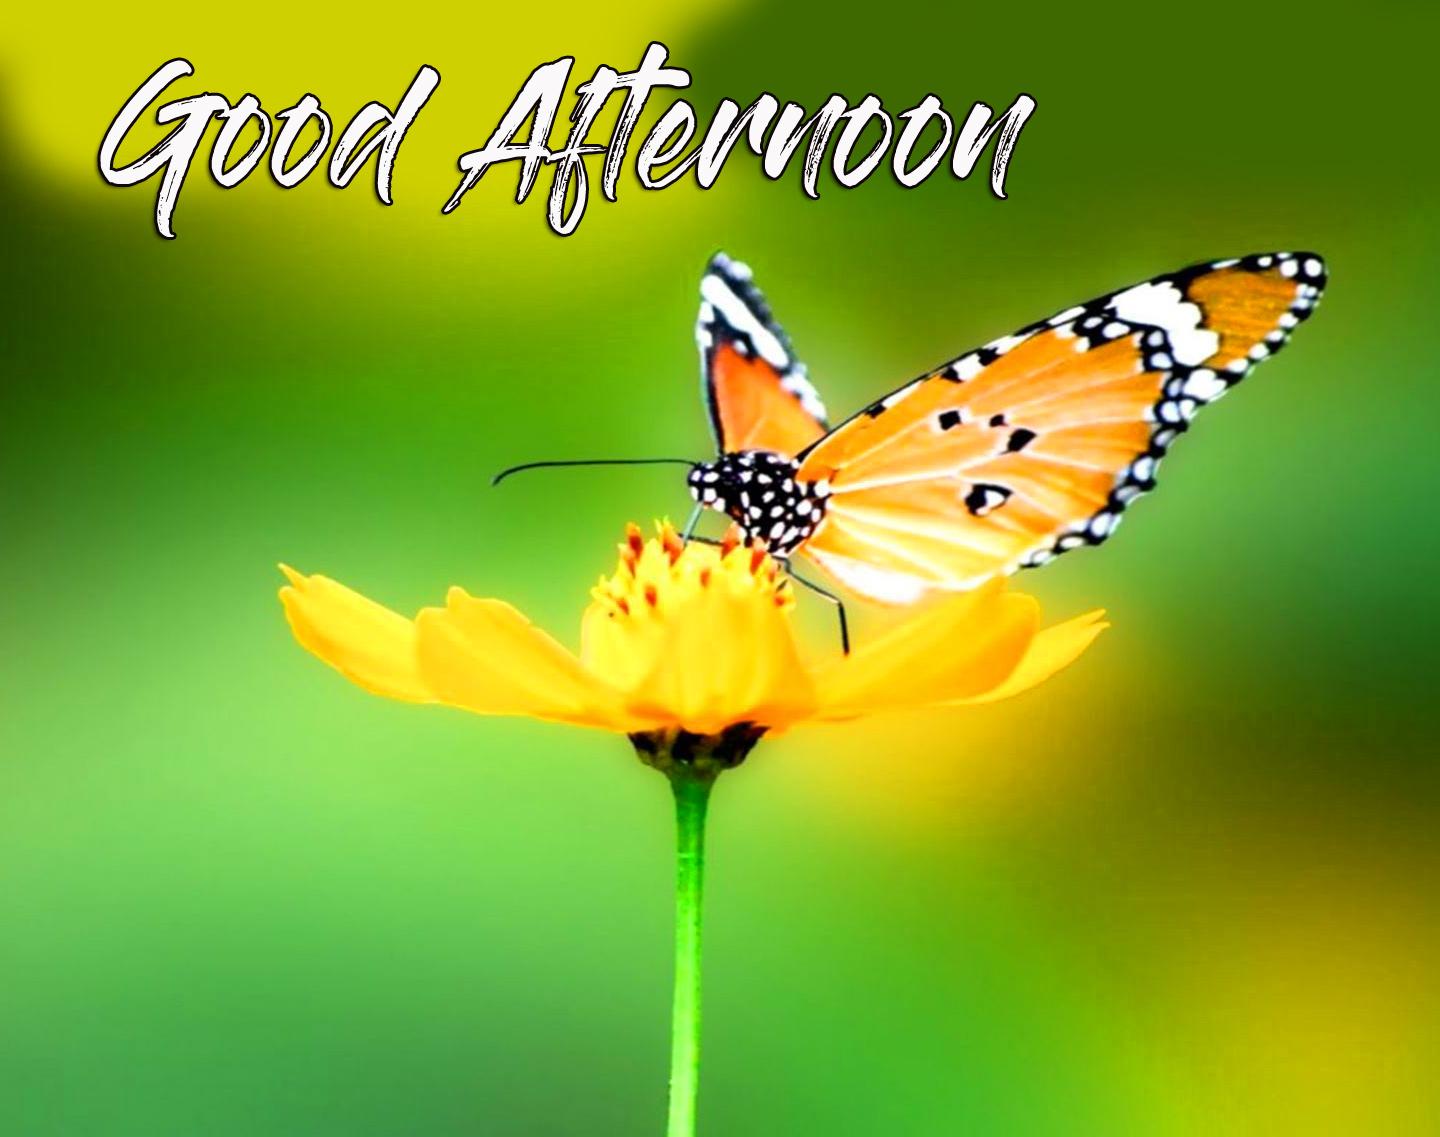 Beautiful Good Afternoon Wallpapers - Top Free Beautiful Good Afternoon ...